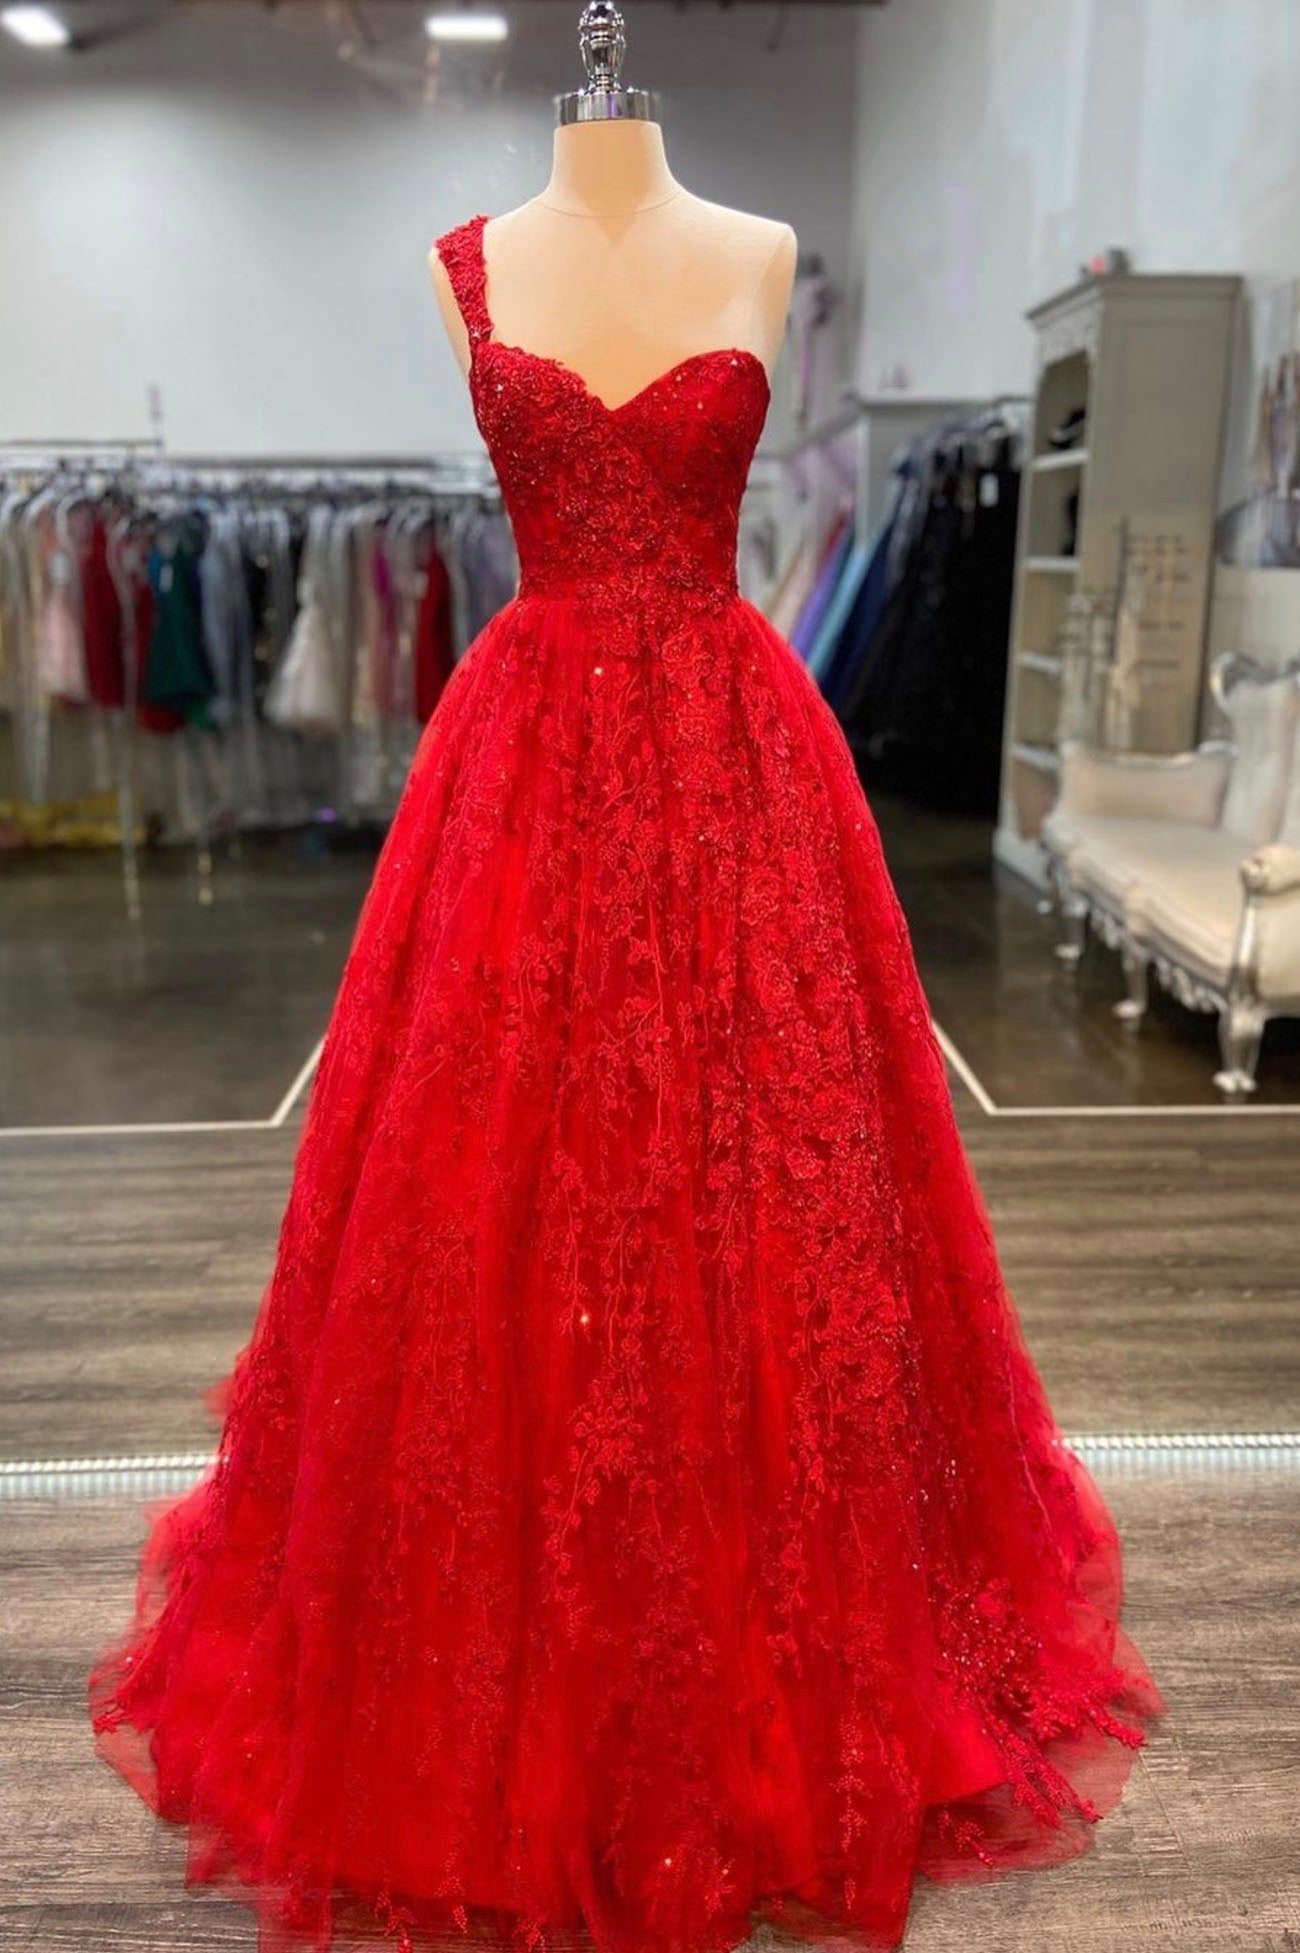 Red Lace Long A-Line Corset Prom Dress, One Shoulder Evening Dress outfit, Bridesmaids Dress Styles